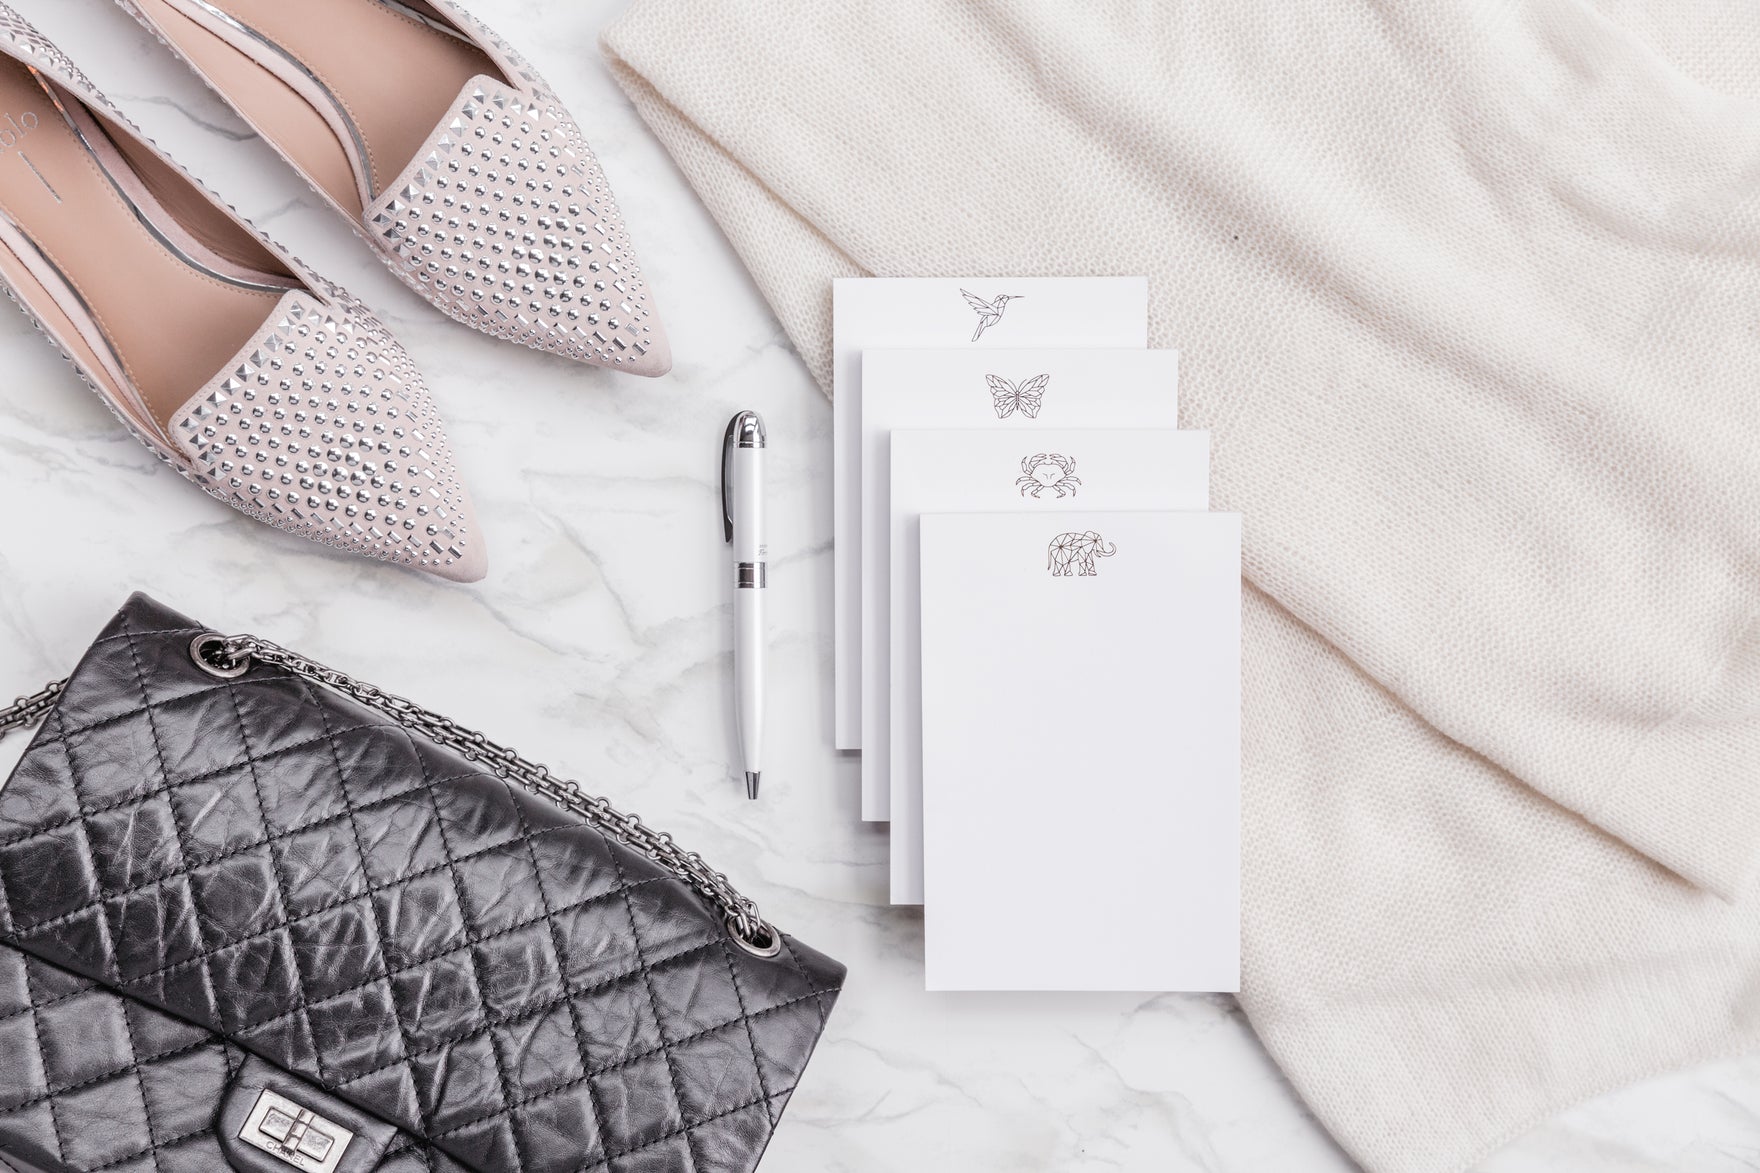 A gold foil notepad sits on a marble surface next to a quilted black handbag, fountain pen, and flats.